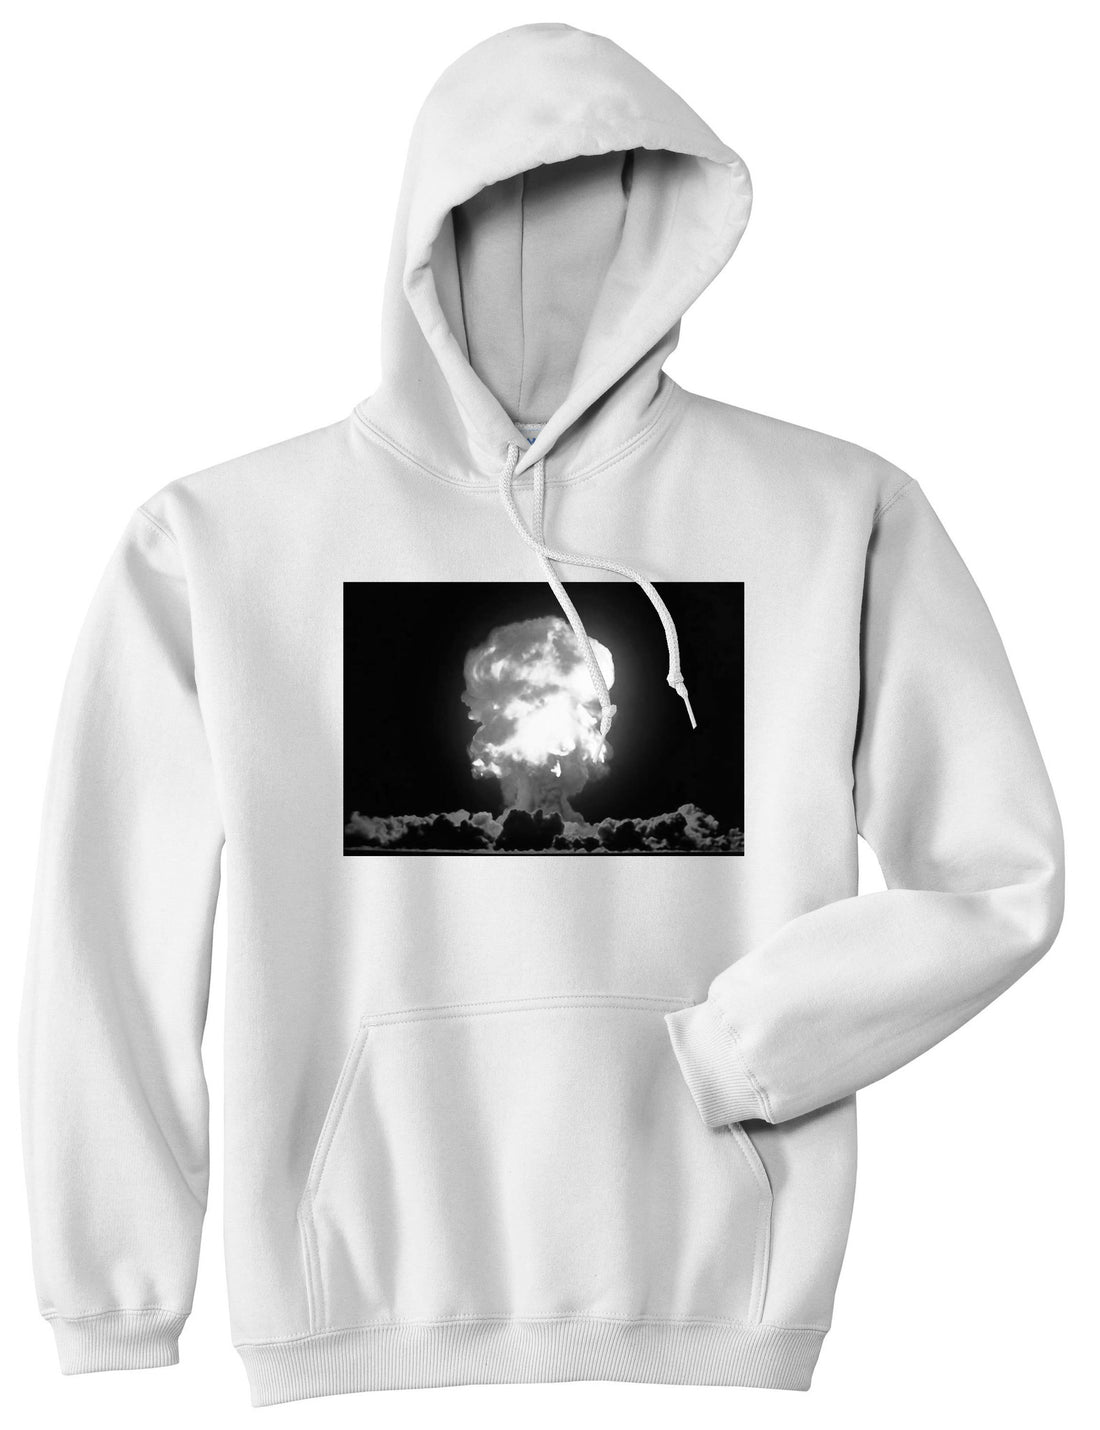 Explosion Nuclear Bomb Cloud Pullover Hoodie in White By Kings Of NY